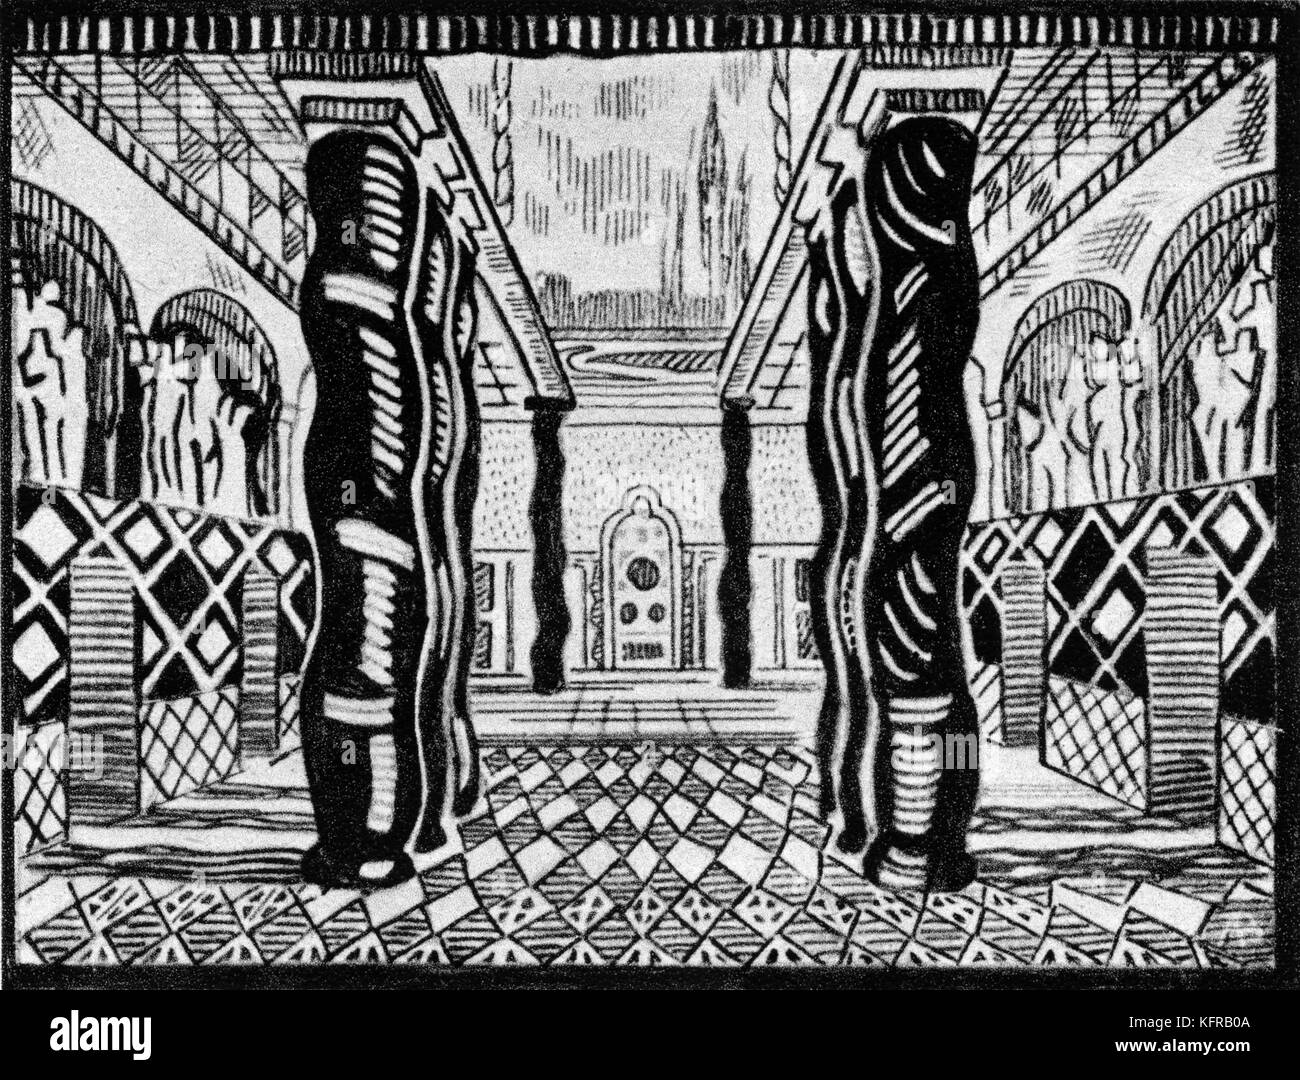 Set design for the third act of Le martyre de Saint Sébastien by Leon Bakst. Le martyre de Saint Sébastien is a five-act musical mystery play produced by Gabriele d'Annunzio, with music by Claude Debussy. LB: Russian painter and set designer, 10 May, 1866 – 28 December, 1924. Stock Photo